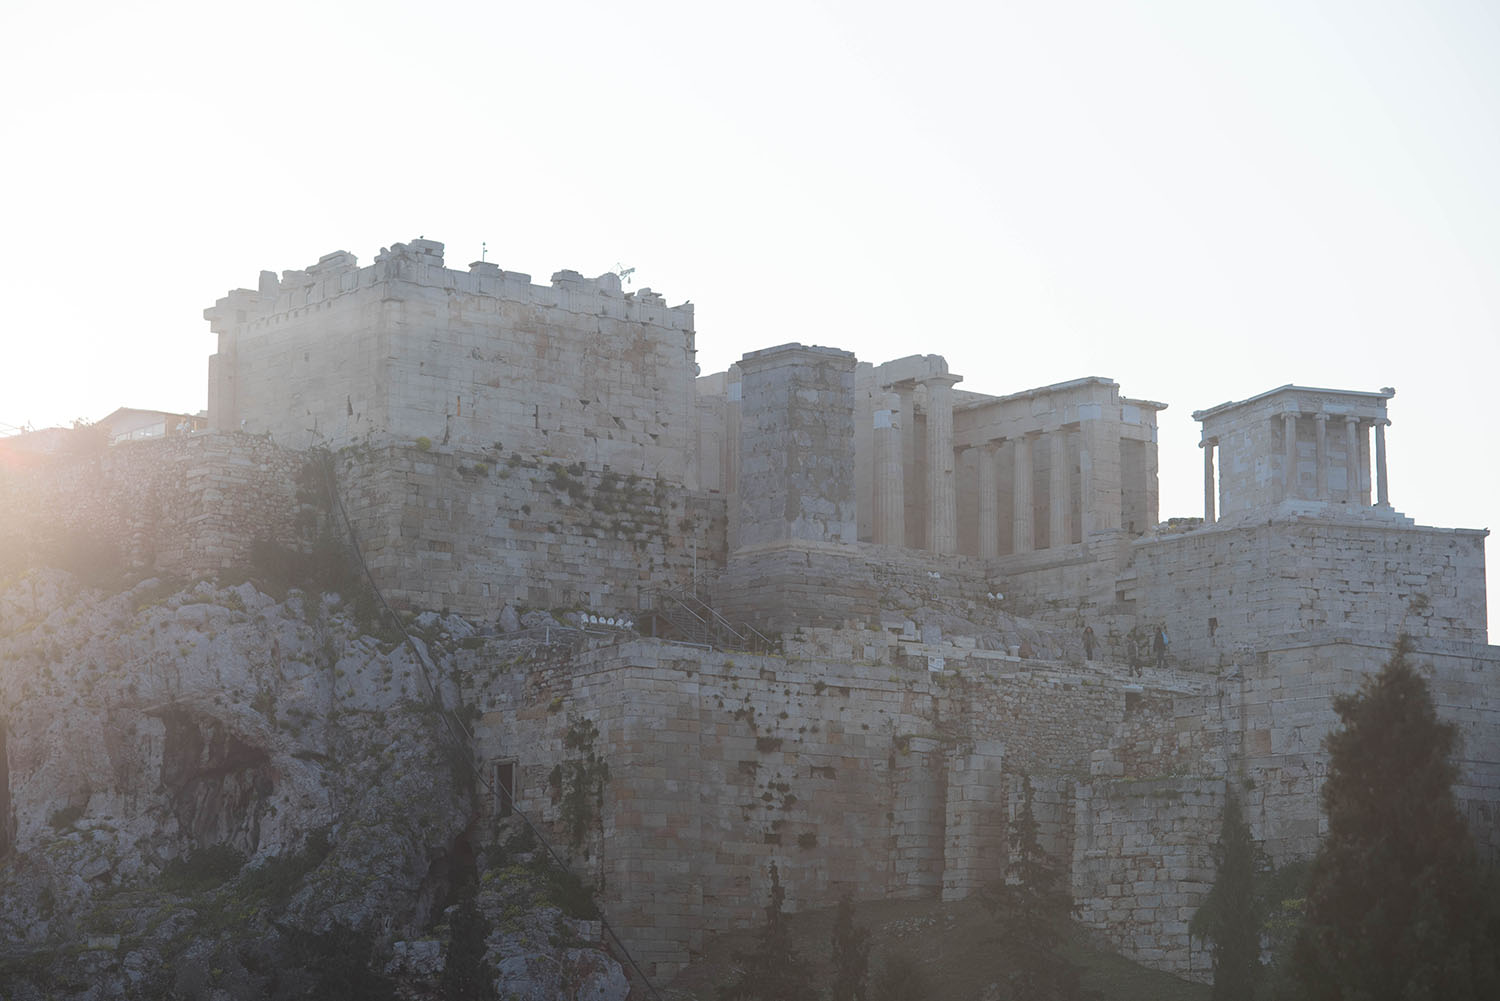 A sunrise view of Acropolis Hill in Athens, Greece, as captured by top Canadian travel blogger Cee Fardoe of Coco & Vera